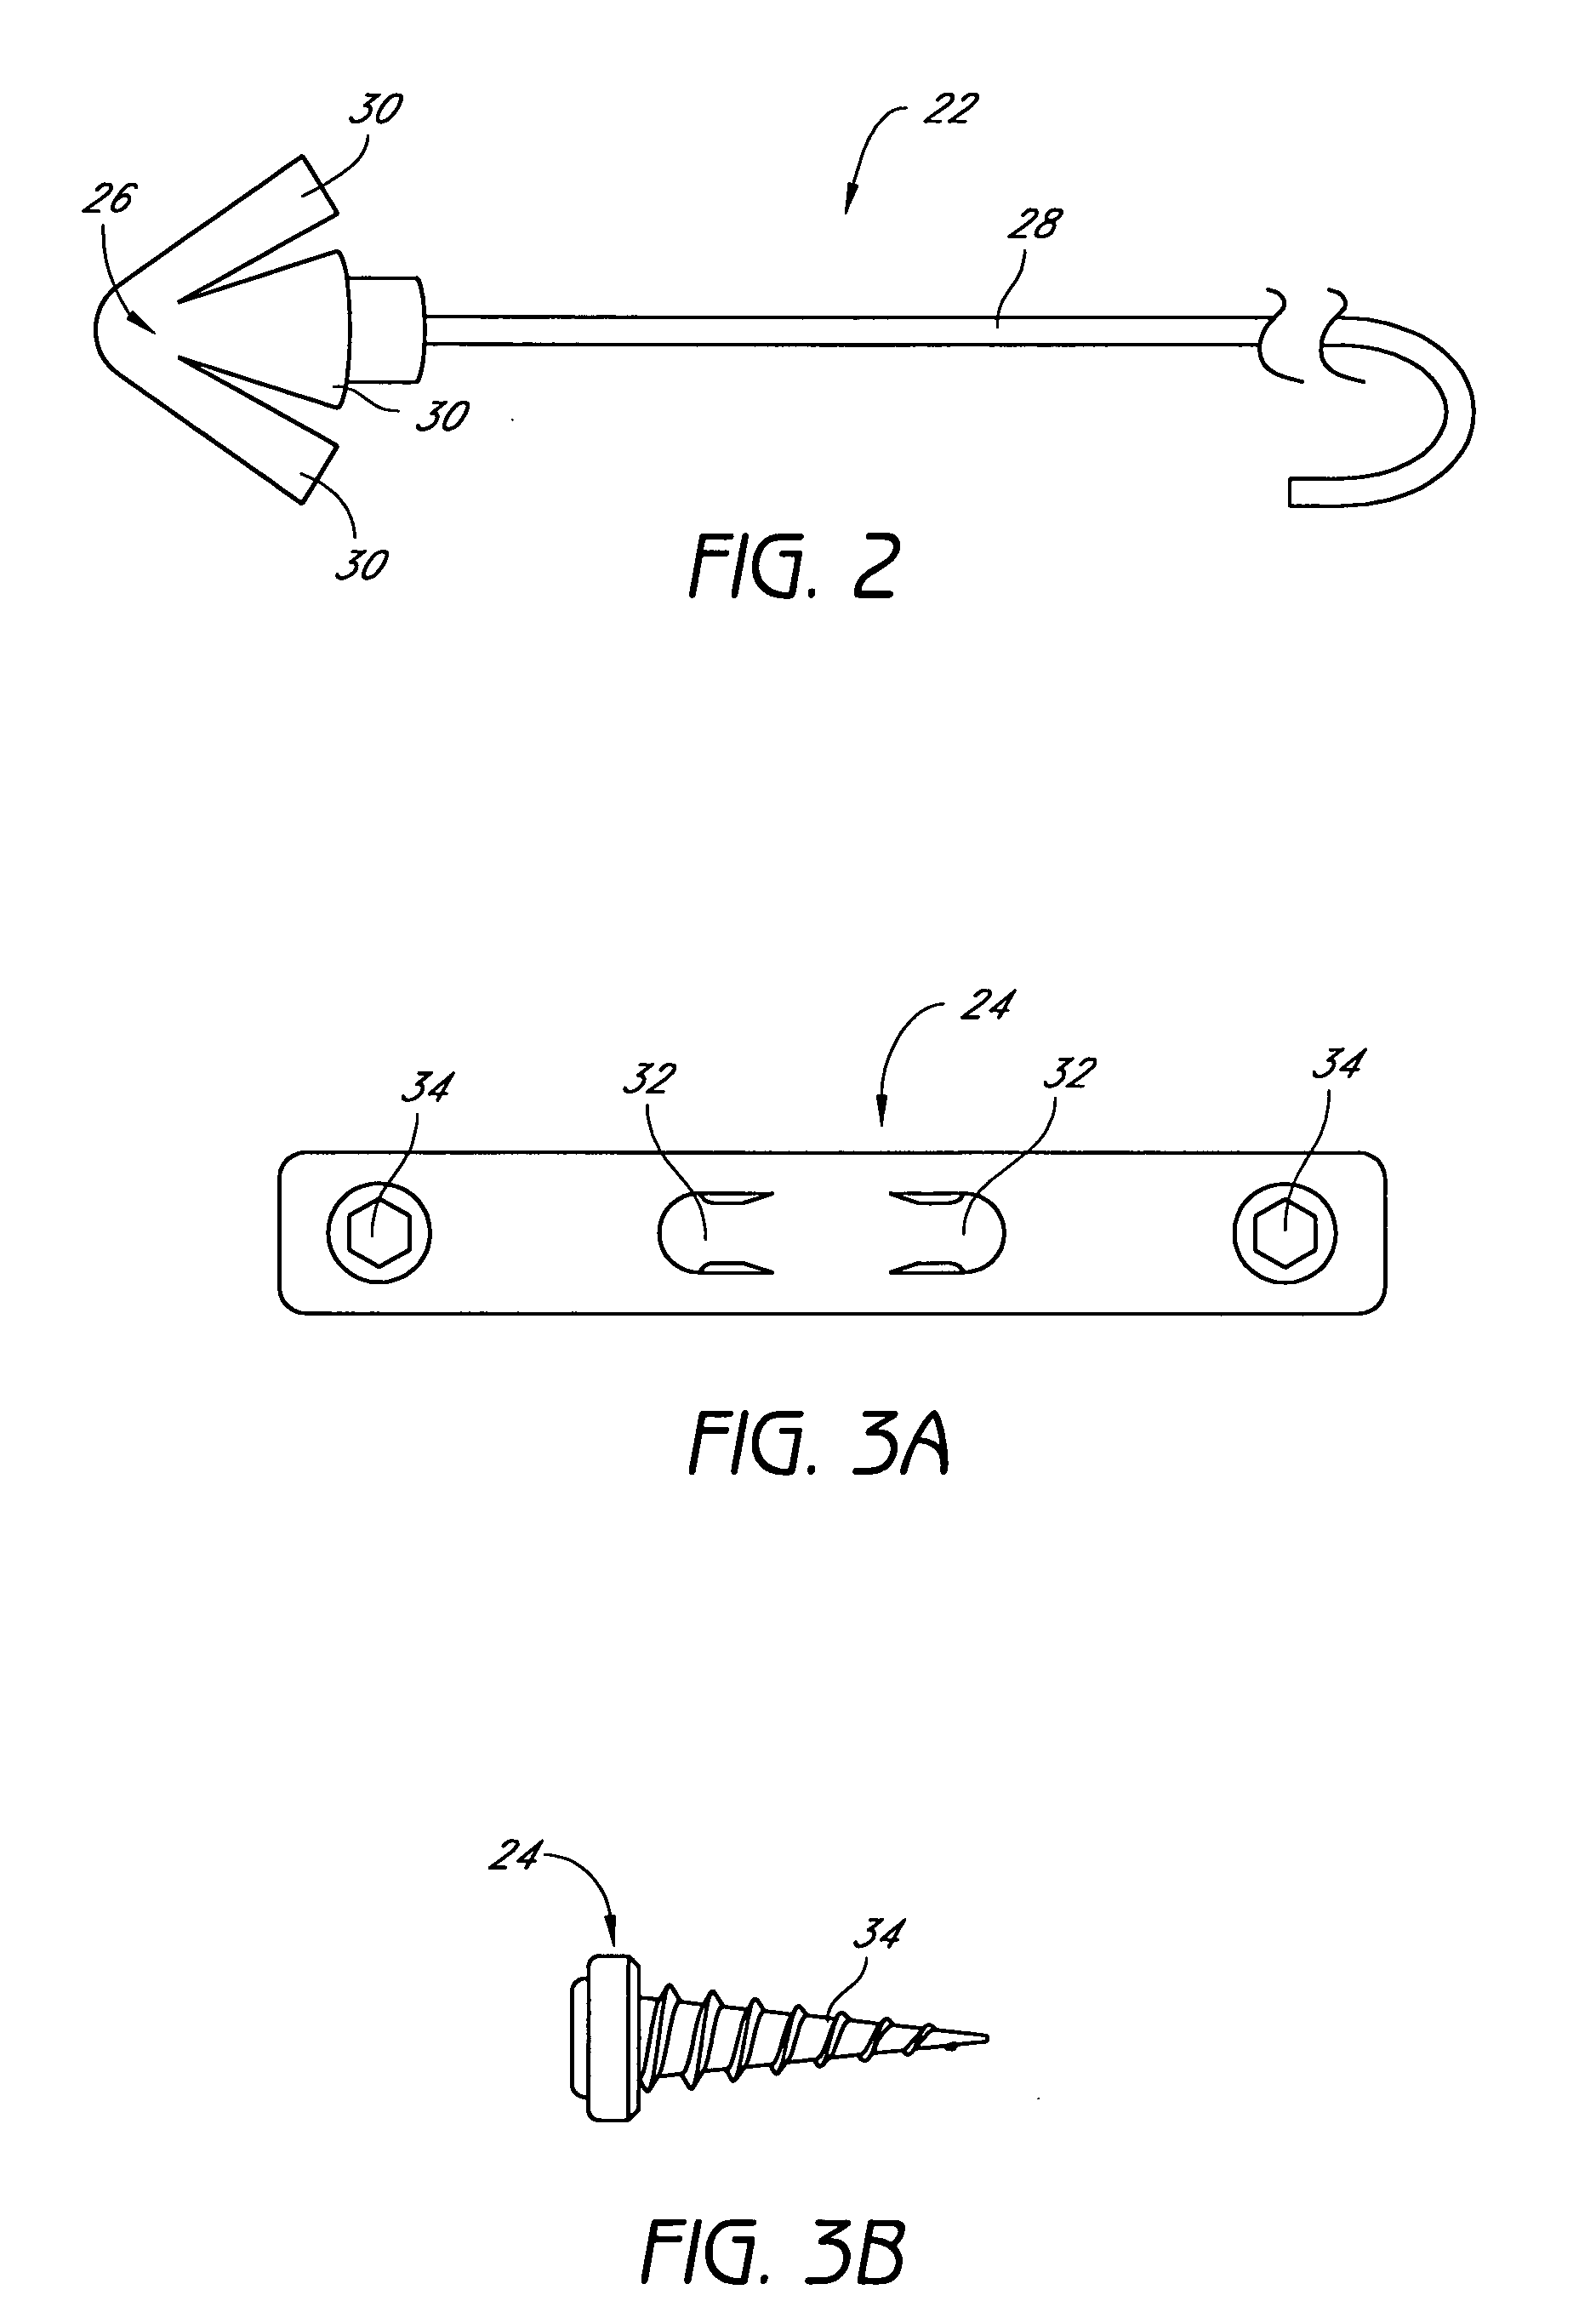 System and method for percutaneous glossoplasty